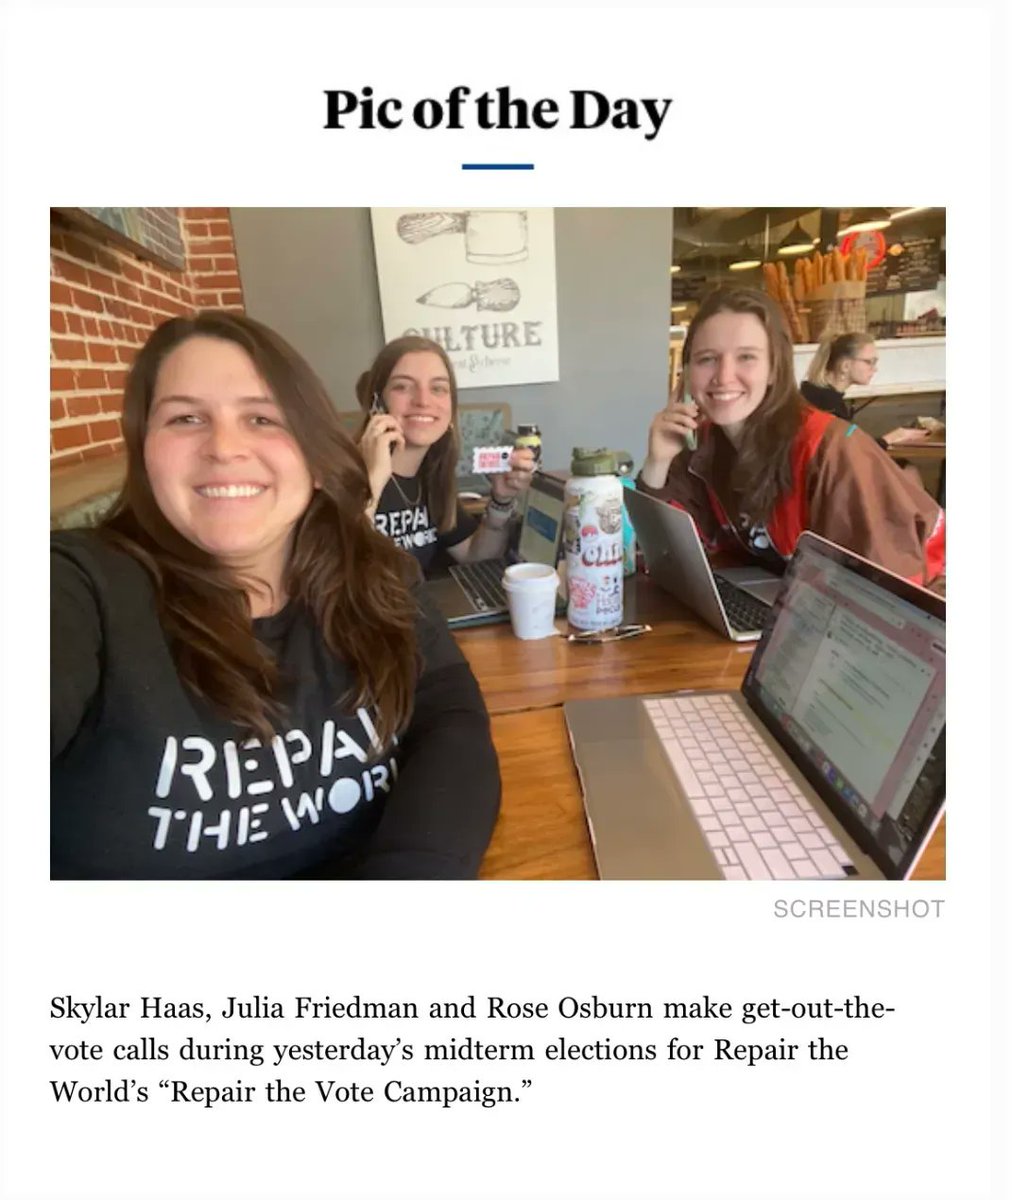 👀 Chutzpah phone-bankers got a shoutout in the @eJPhil newsletter this AM! We were proud to team up with @repairtheworld + @Enviro_Voter yesterday for our Election Day get-out-the-climate-vote event.